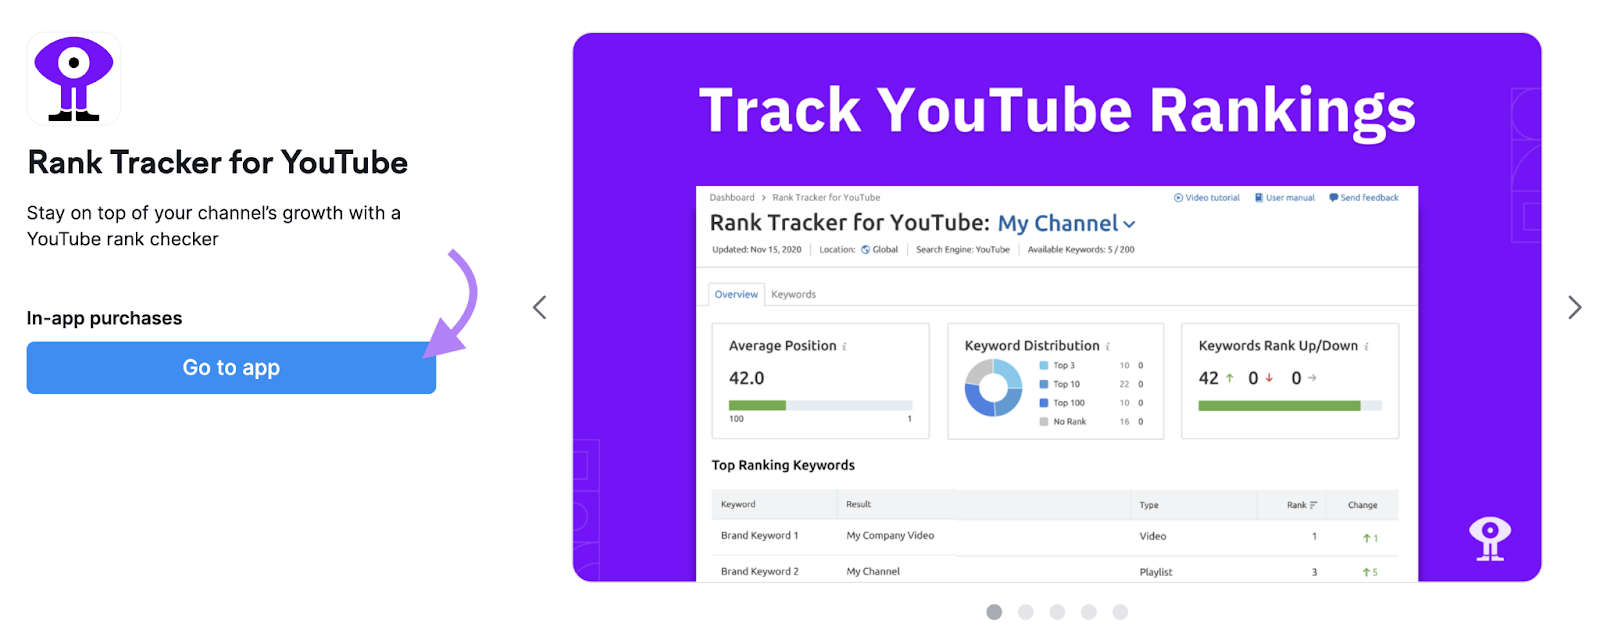 Rank Tracker for YouTube landing page